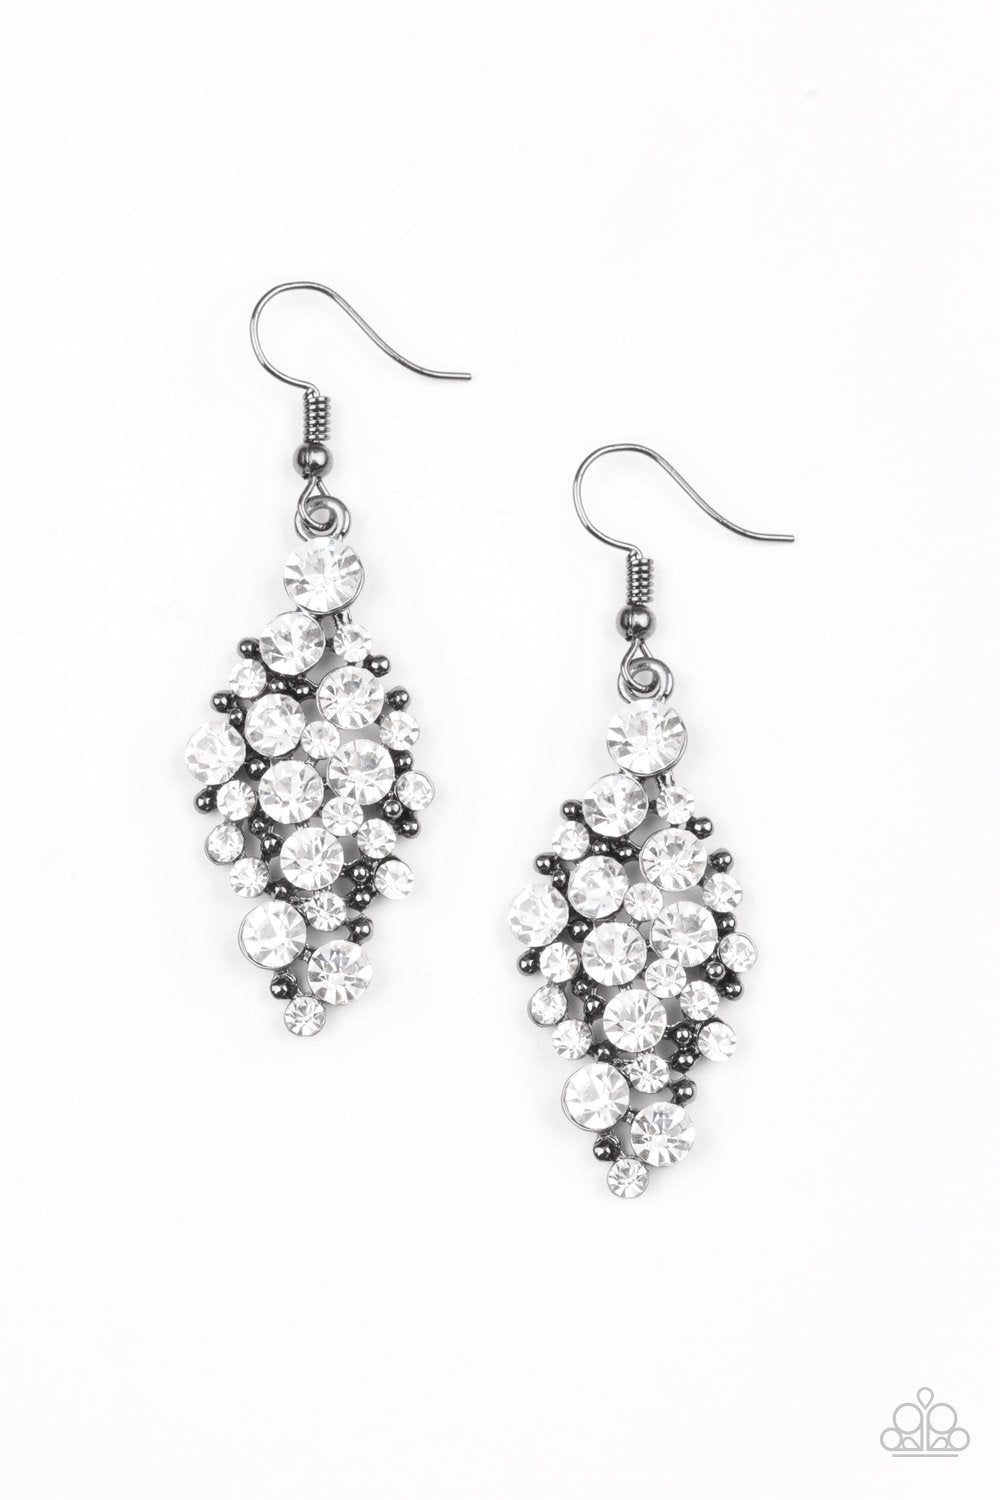 Cosmically Chic Black and White Rhinestone Earrings - Paparazzi Accessories-CarasShop.com - $5 Jewelry by Cara Jewels